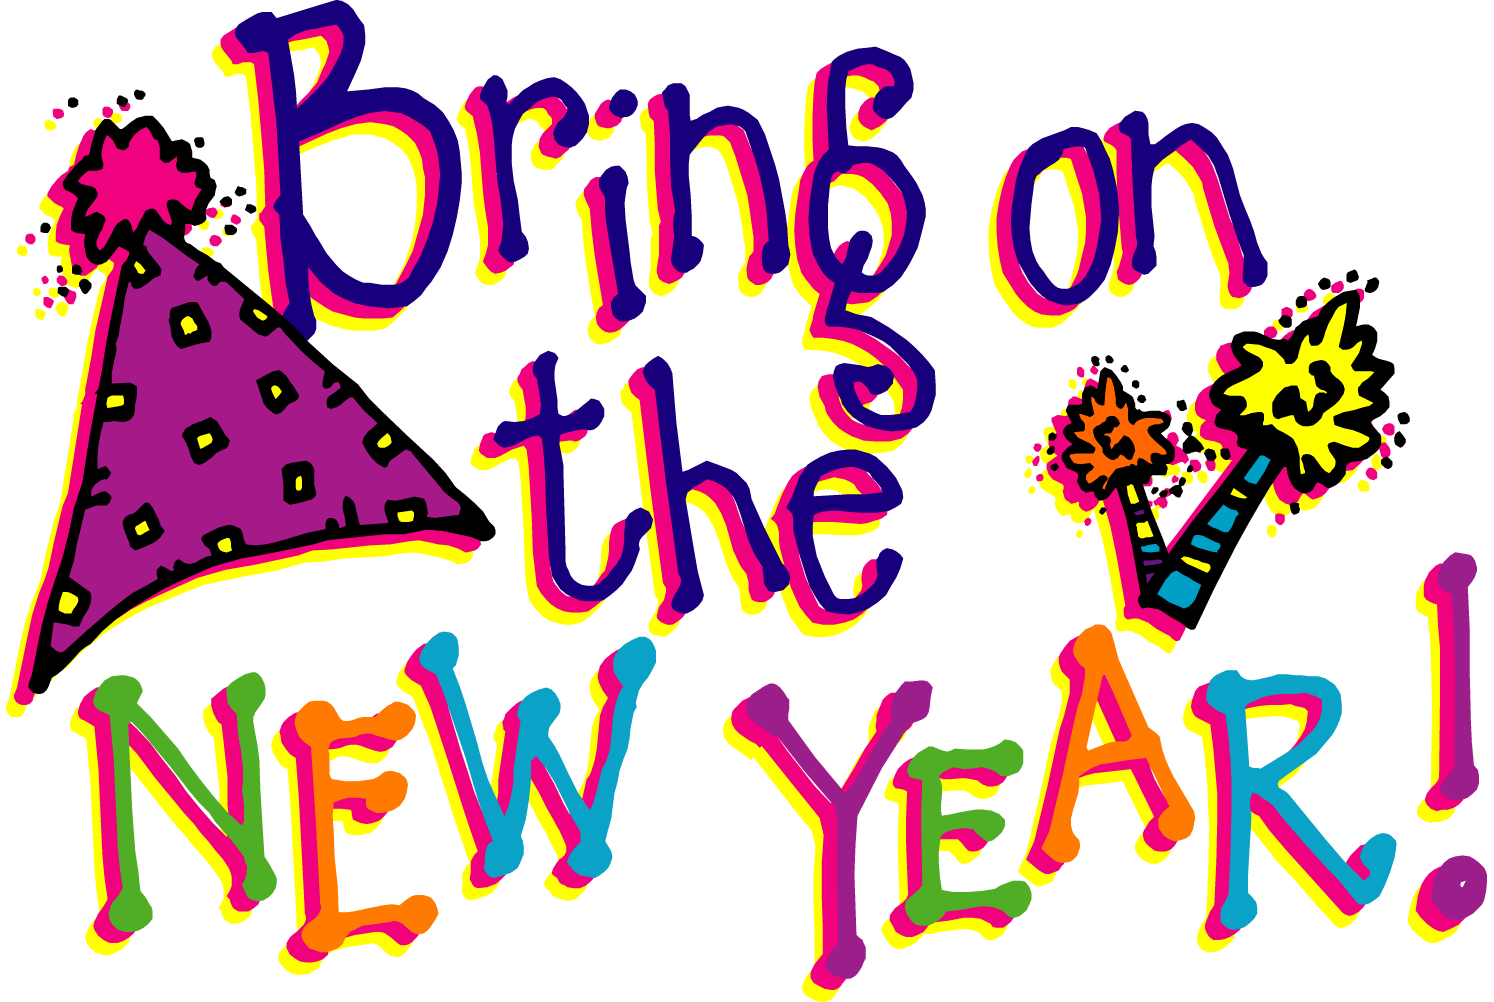 New years eve year. January clipart themed